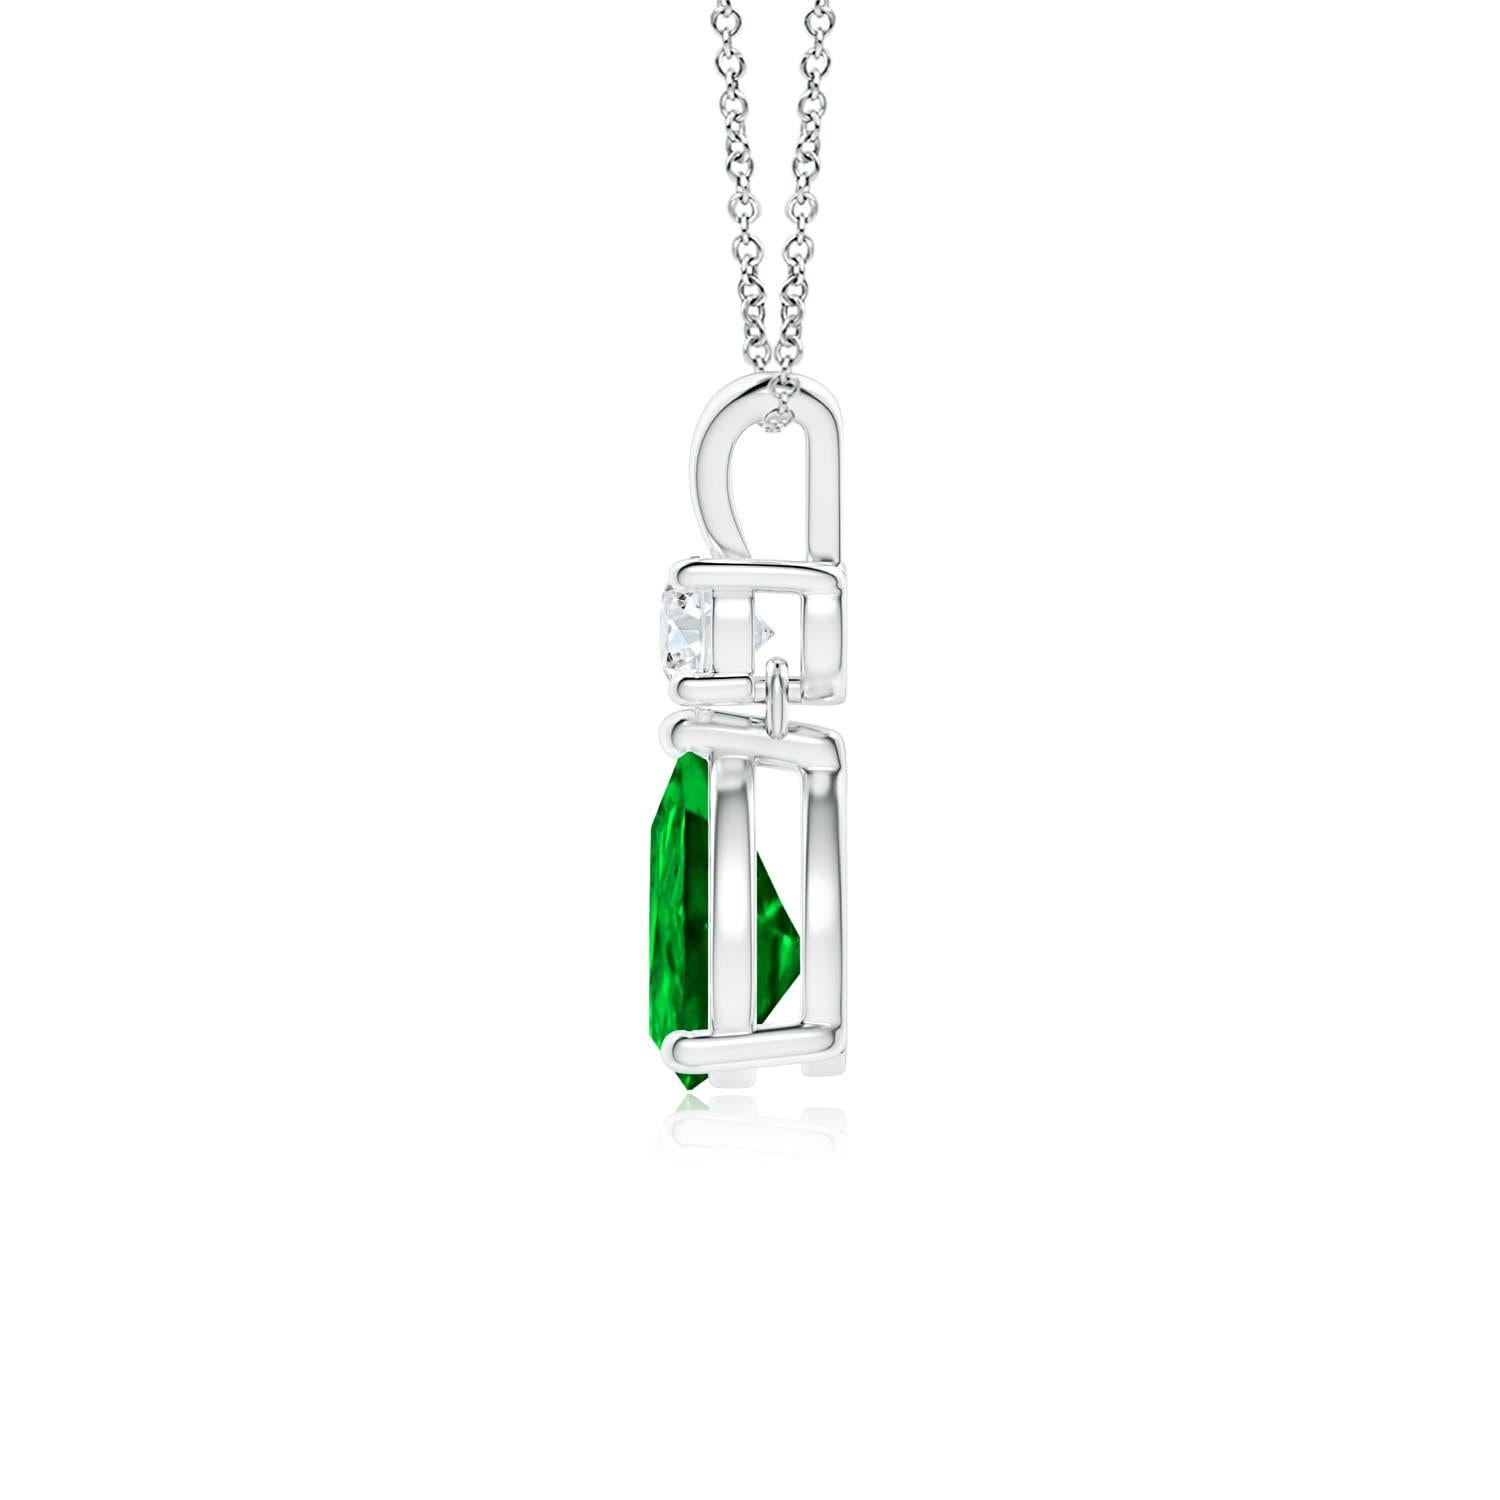 A vivid green pear cut emerald dangles from a sparkling white diamond on this elegant drop pendant. The lustrous V bale adds beauty to this platinum emerald and diamond pendant. It exudes luxurious charm with its remarkable long drop design.
Emerald